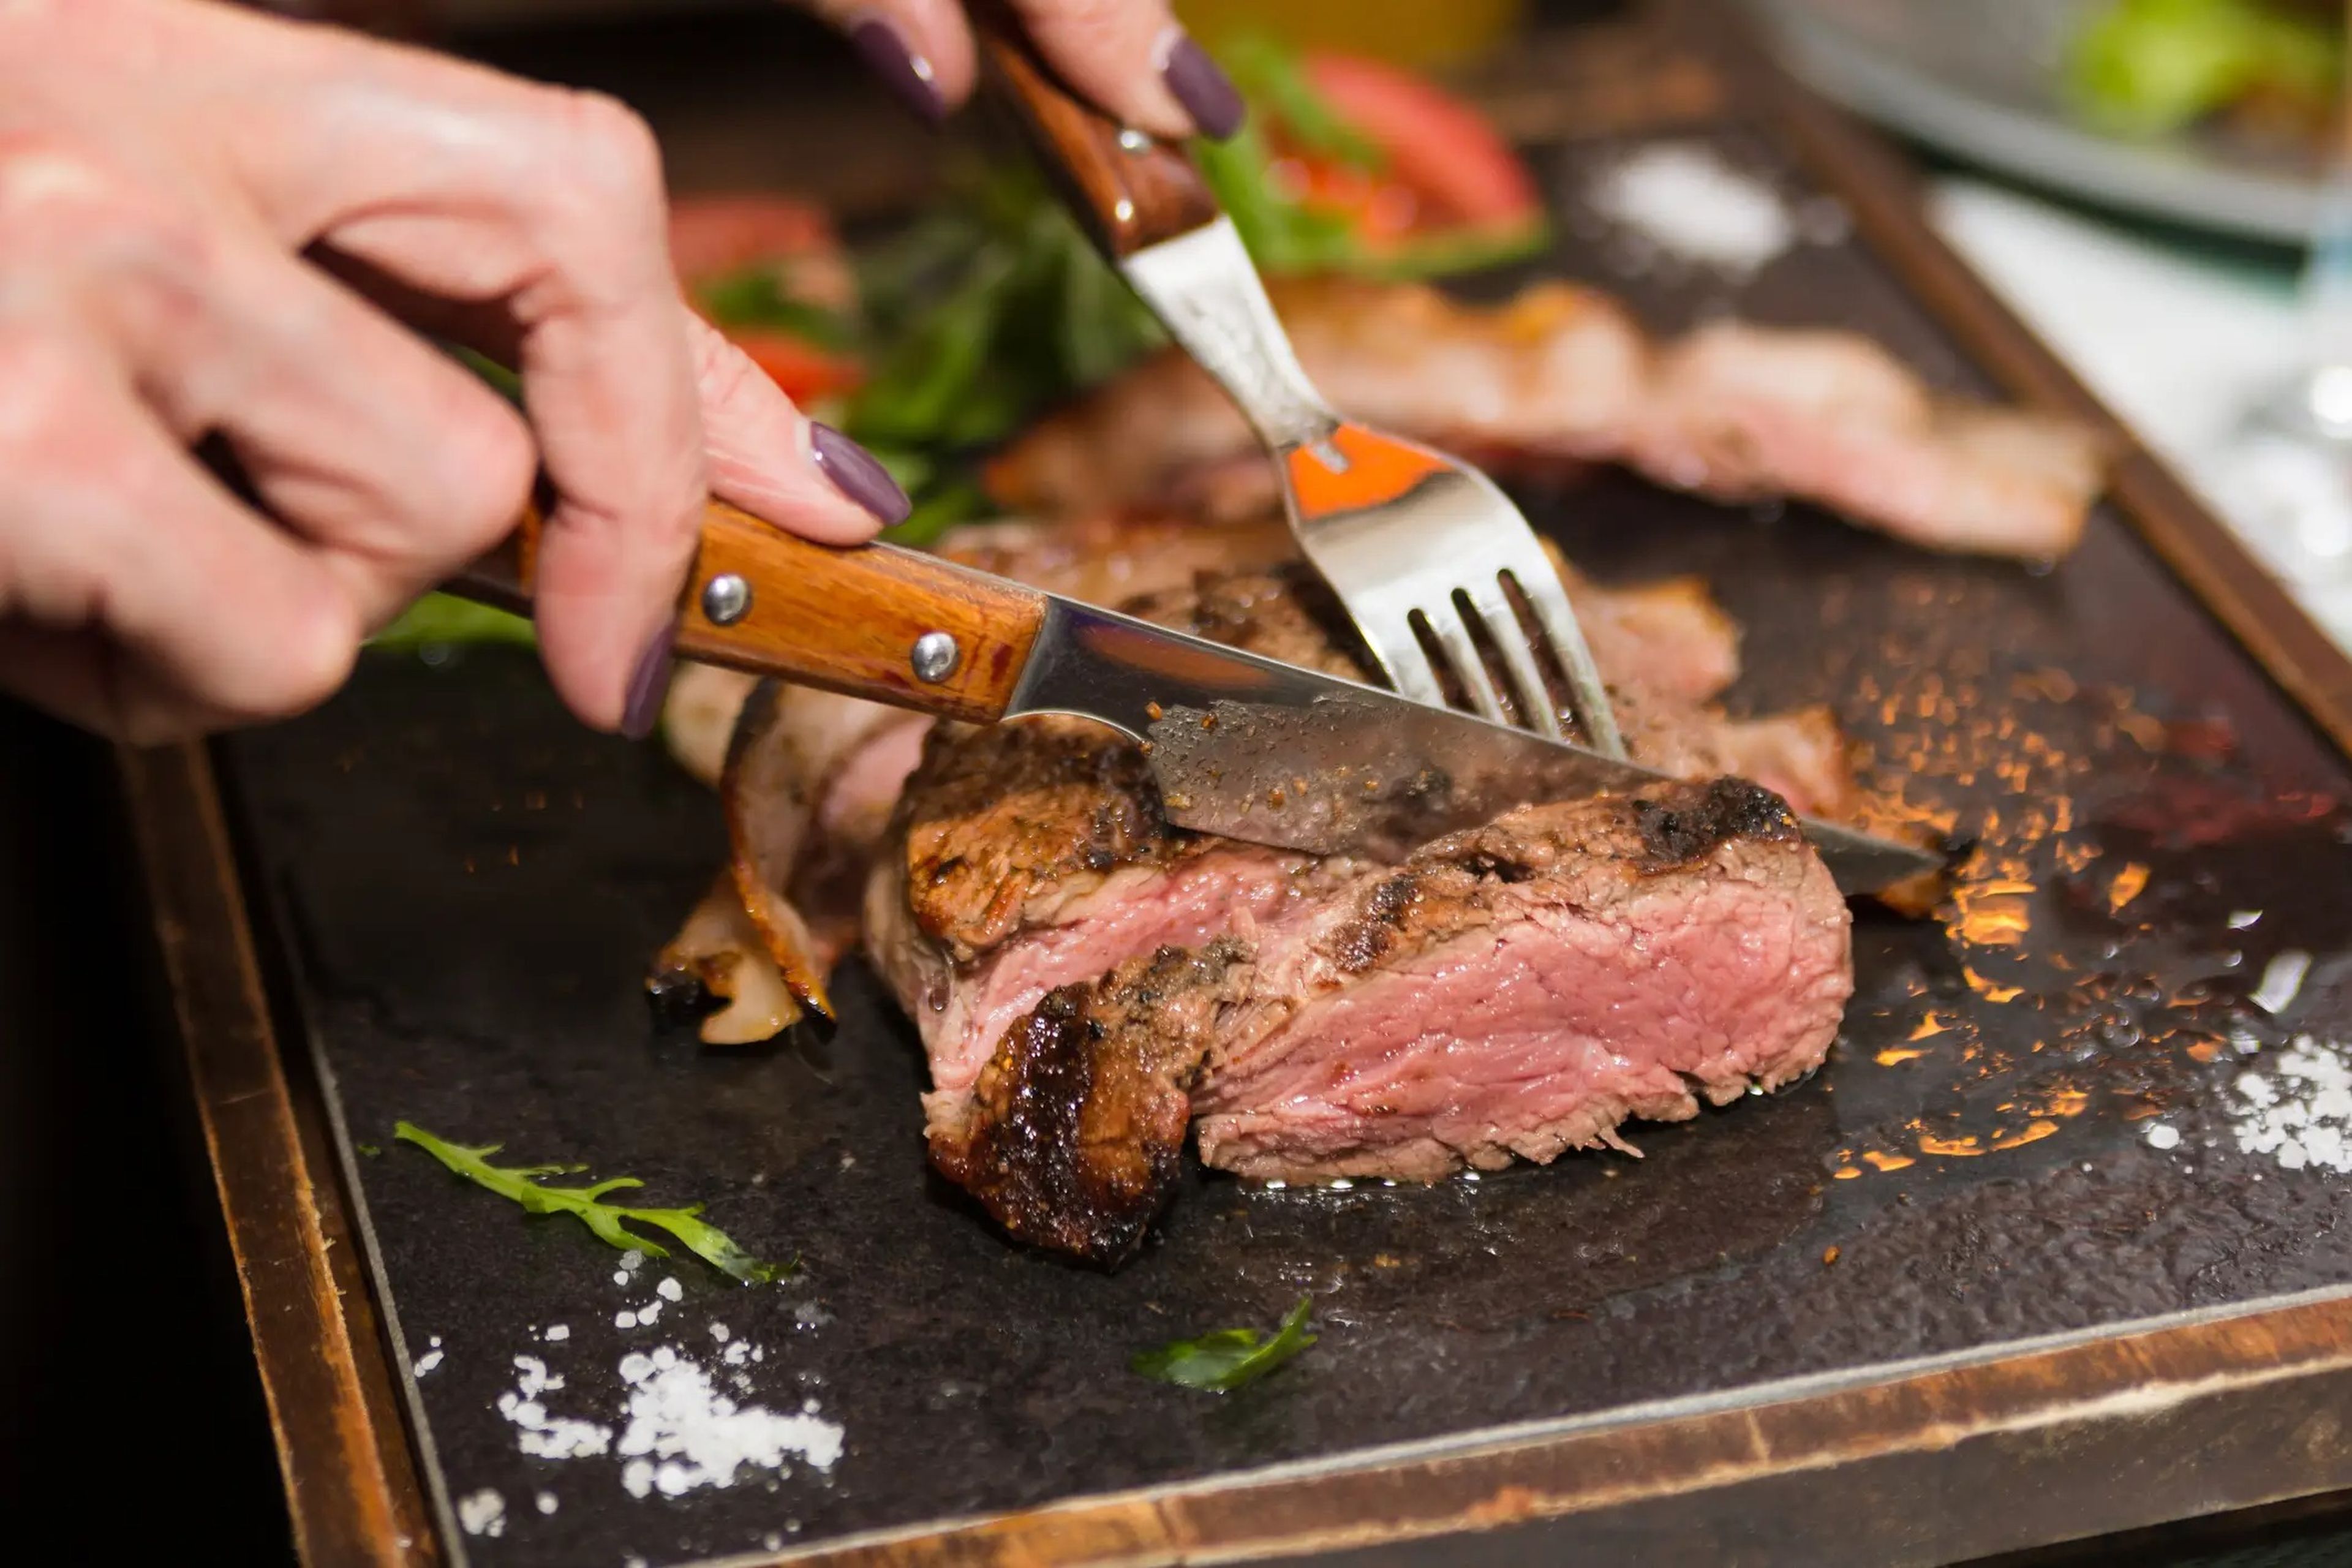 A close up of someone cutting into a juicy steak